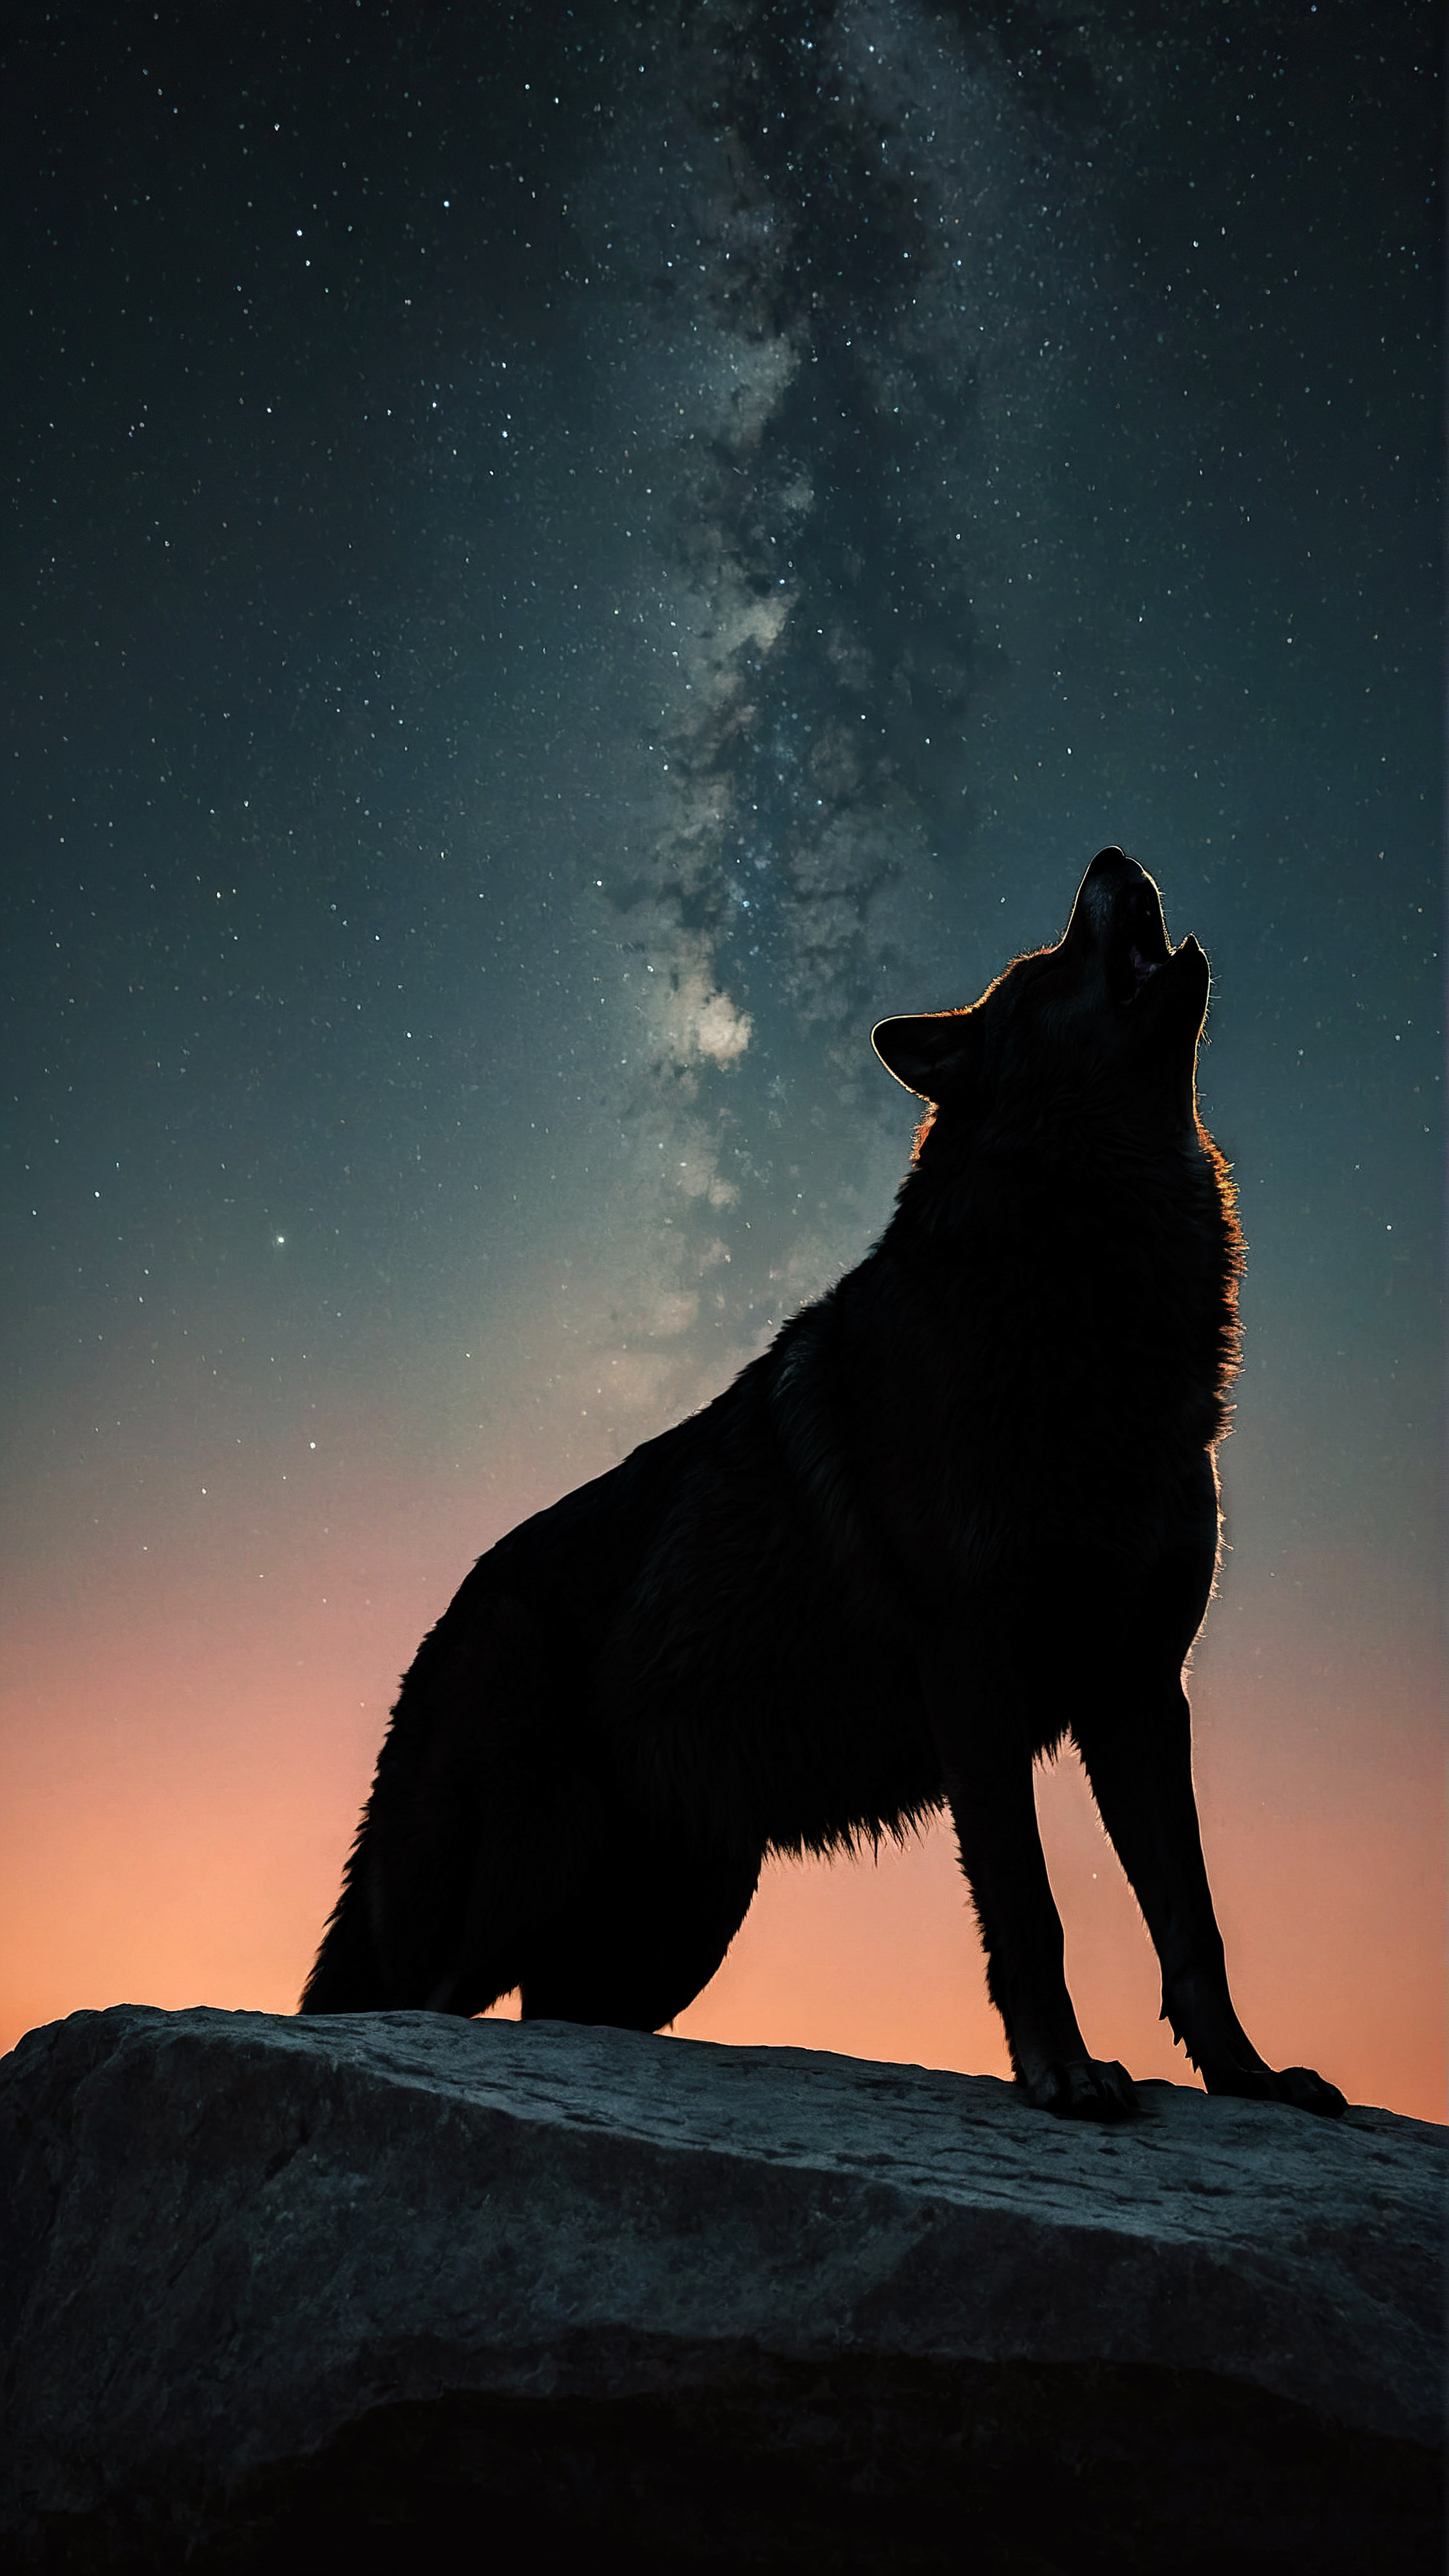 Admire the mystery and beauty of our aesthetic lock screen for iPhone, an illustration of a black silhouette of a wolf standing on a rock against the backdrop of a scenic sunset and starry sky.